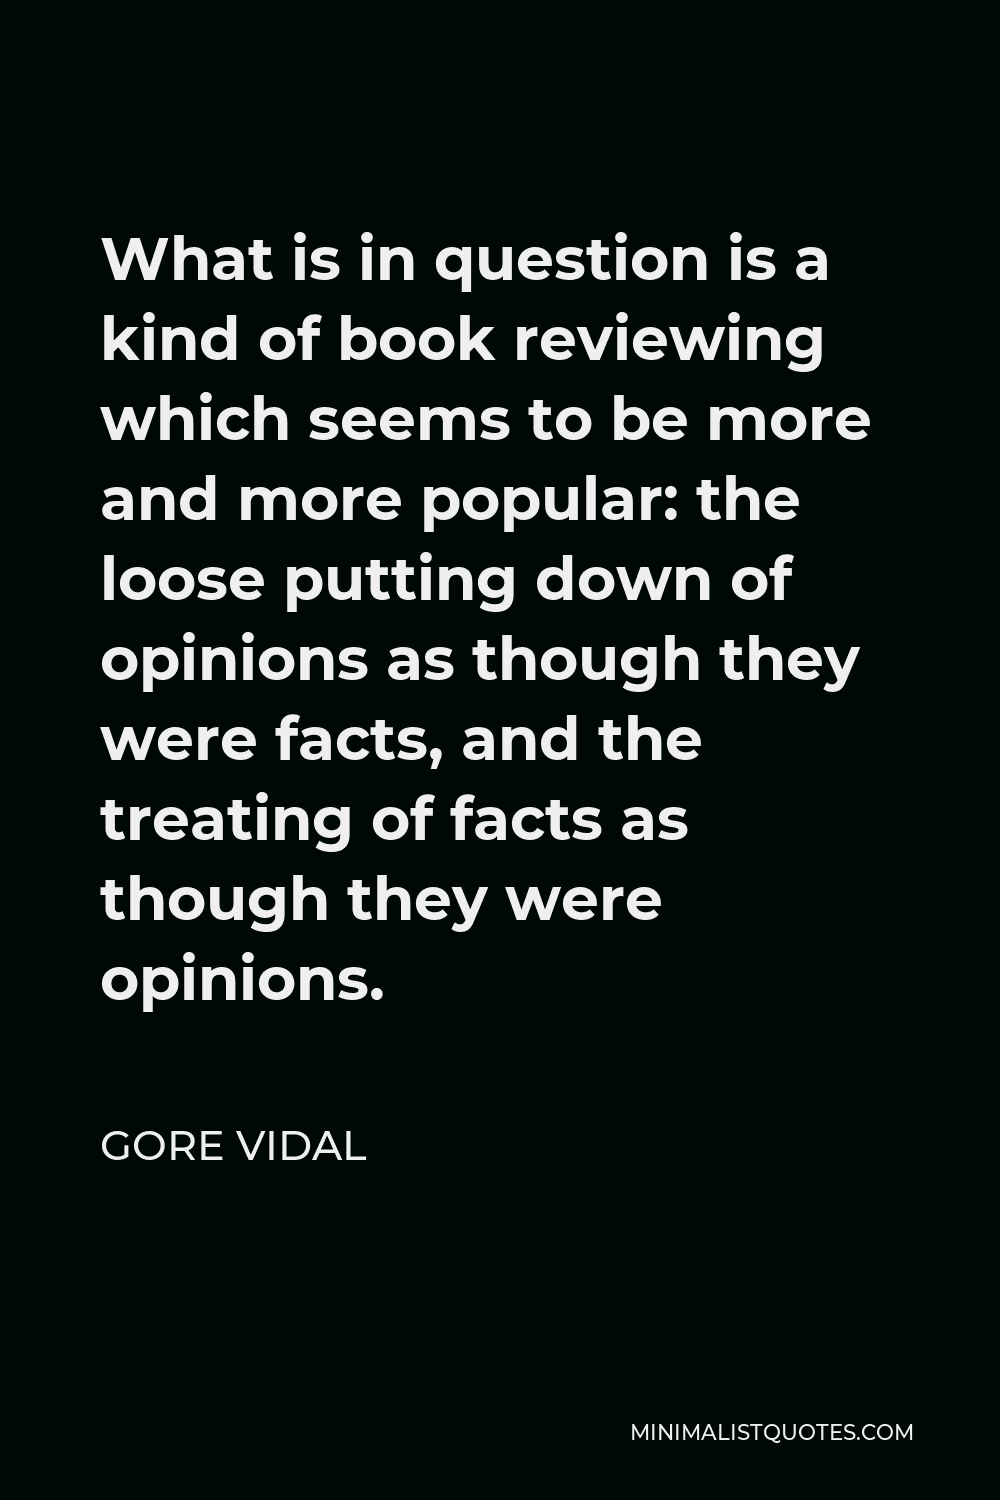 Gore Vidal Quote - What is in question is a kind of book reviewing which seems to be more and more popular: the loose putting down of opinions as though they were facts, and the treating of facts as though they were opinions.